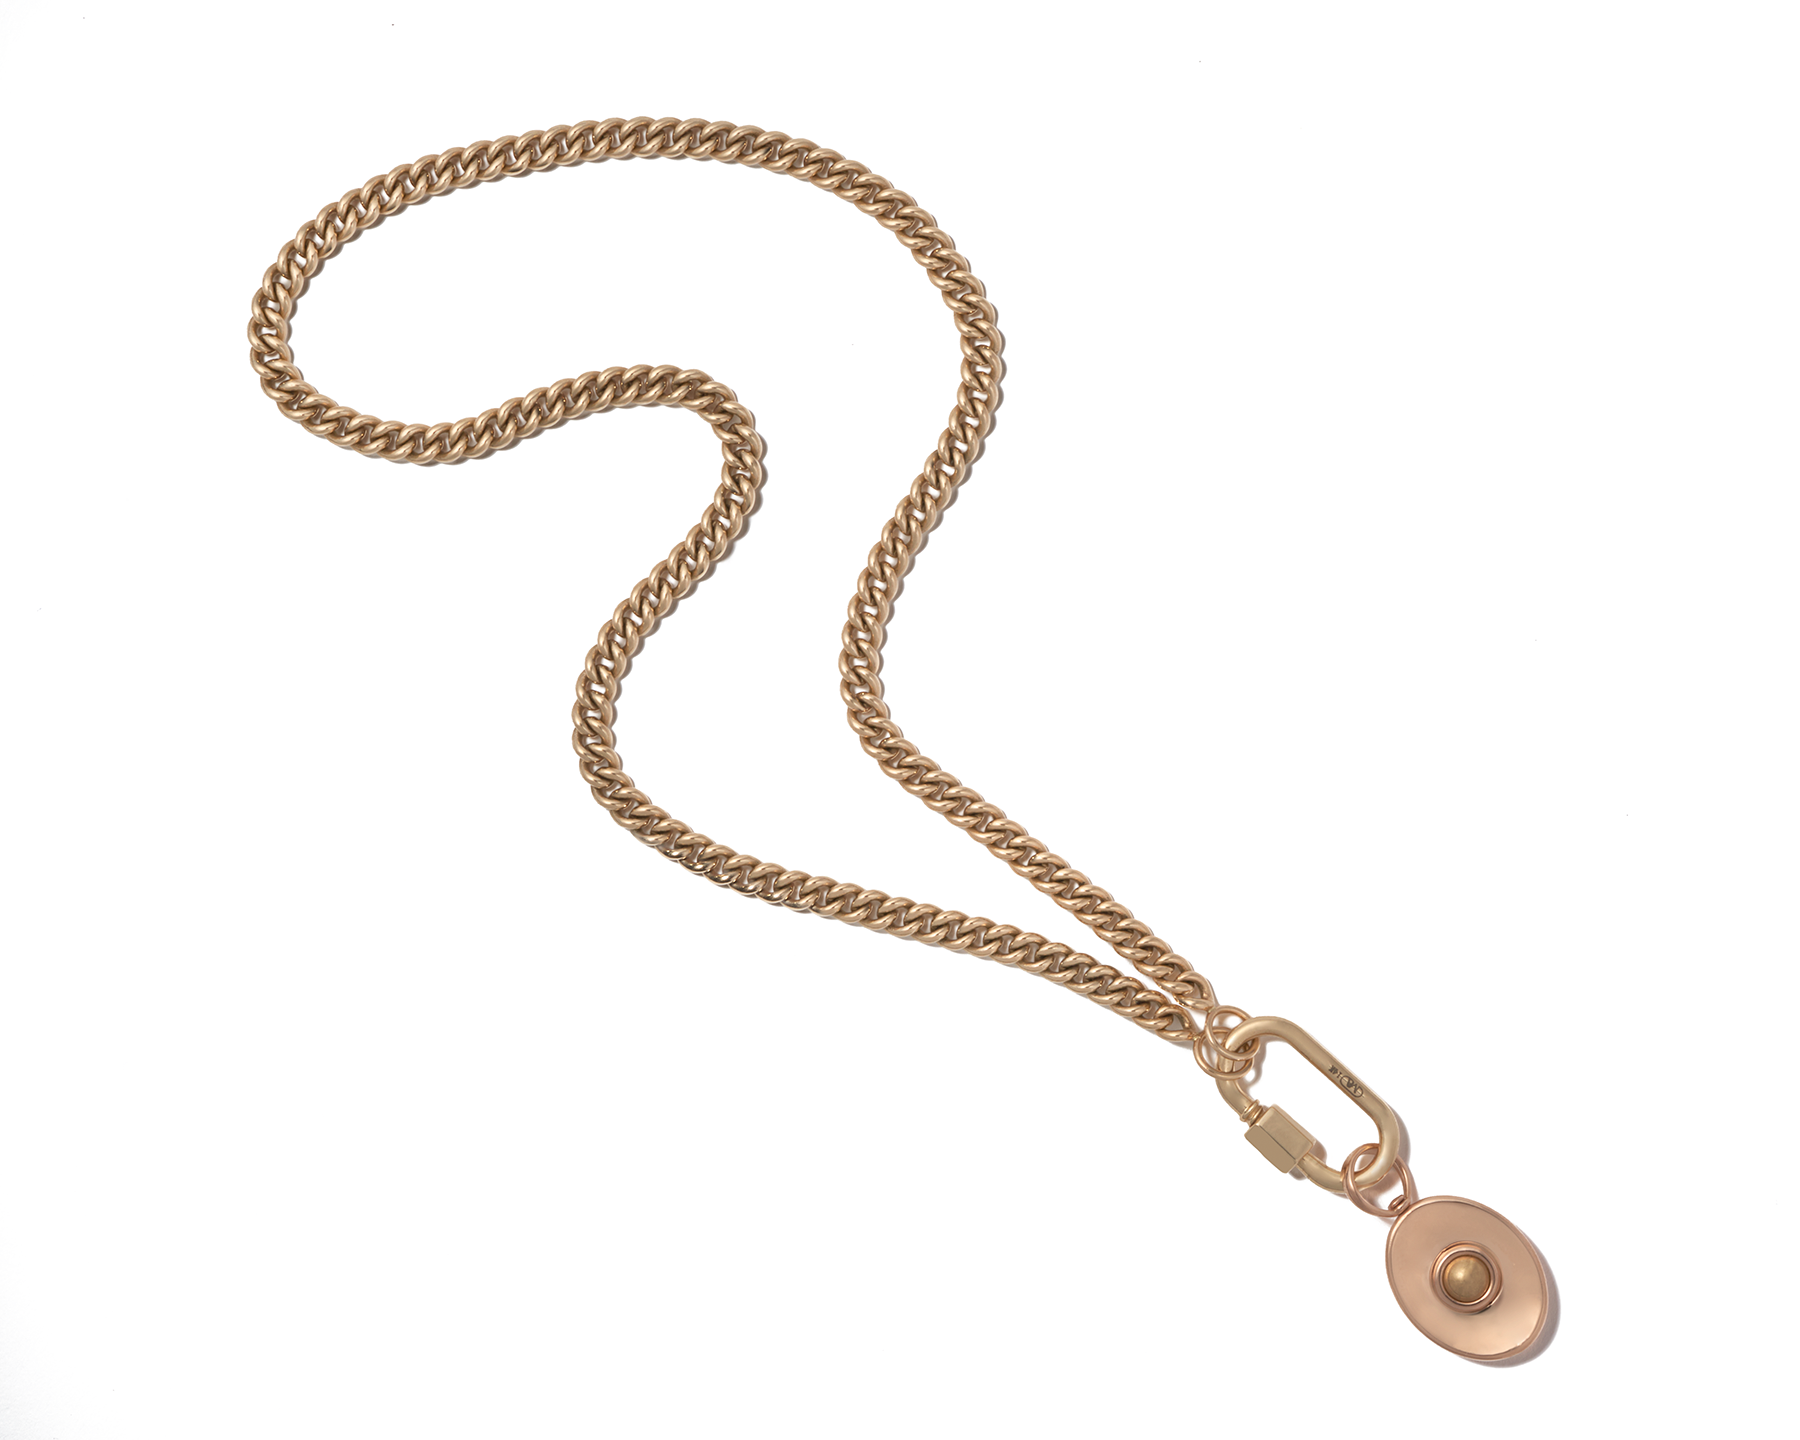 Custom pendant necklace with yellow gold chain and rose gold charm against white backdrop